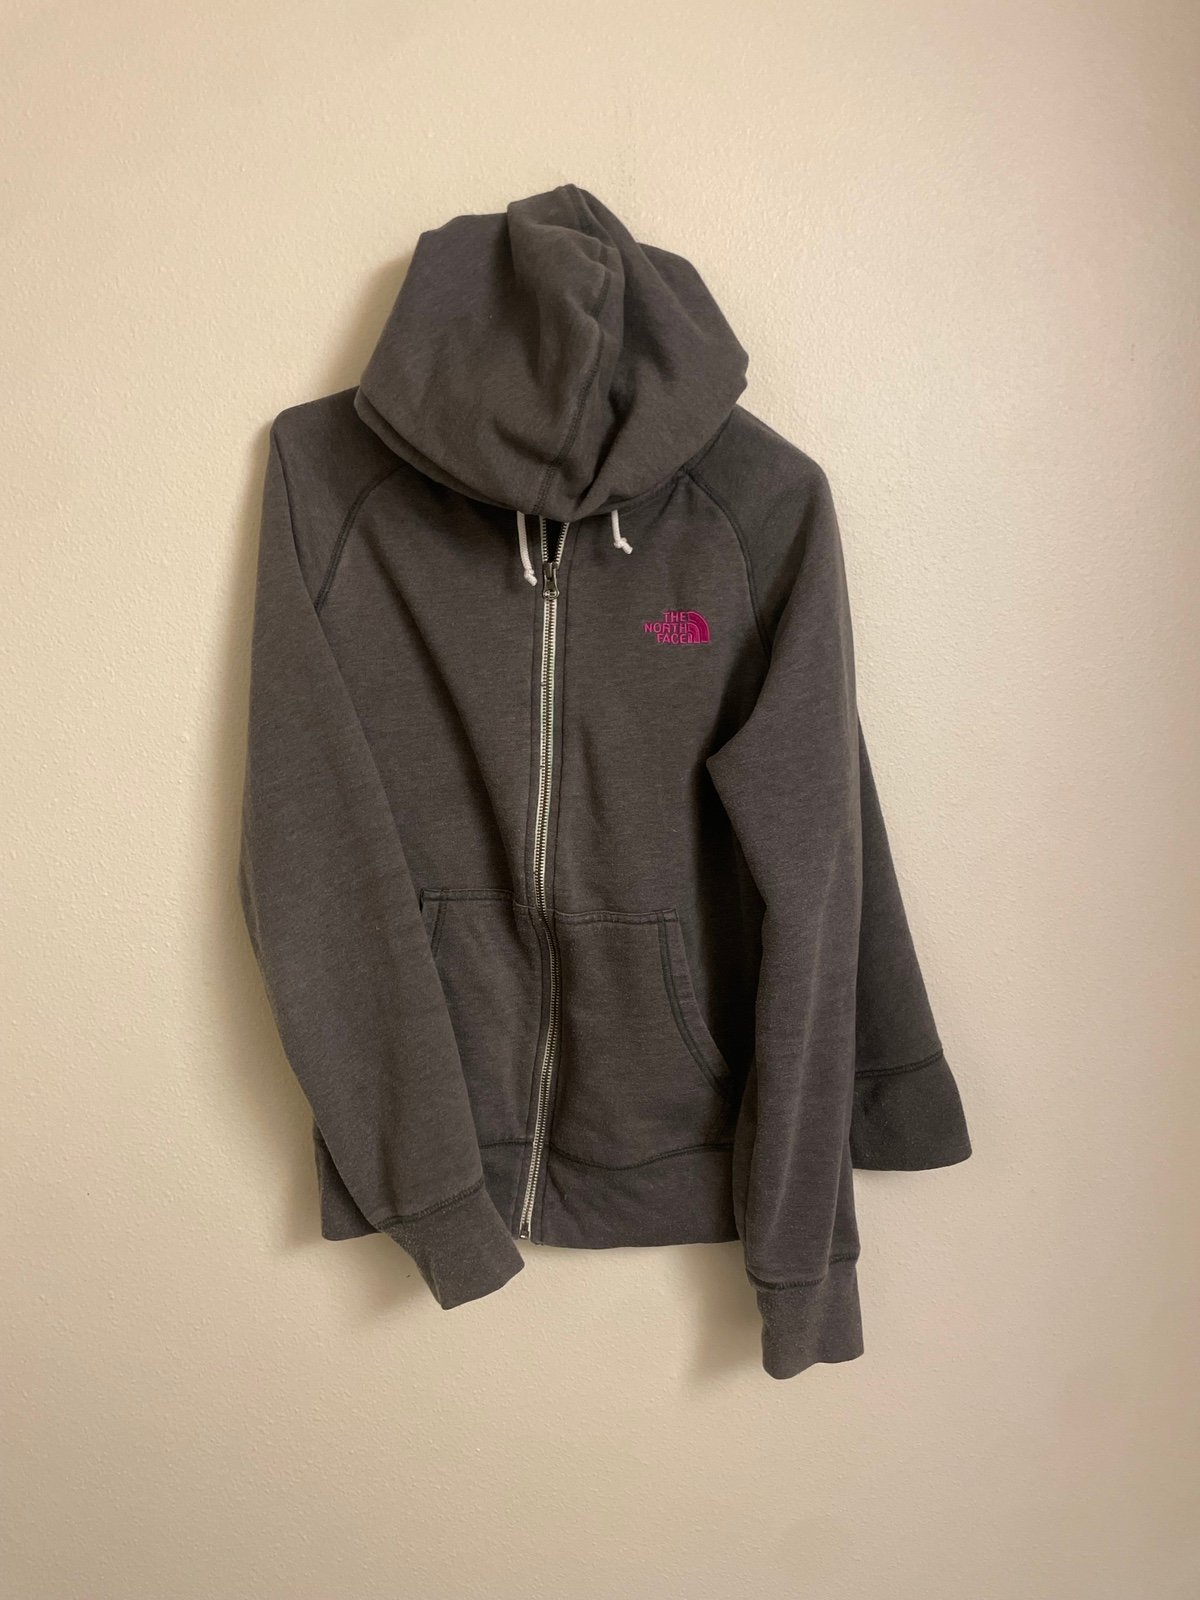 Promotions  The north face sweatshirt size XL NkiRFGLdM Discount